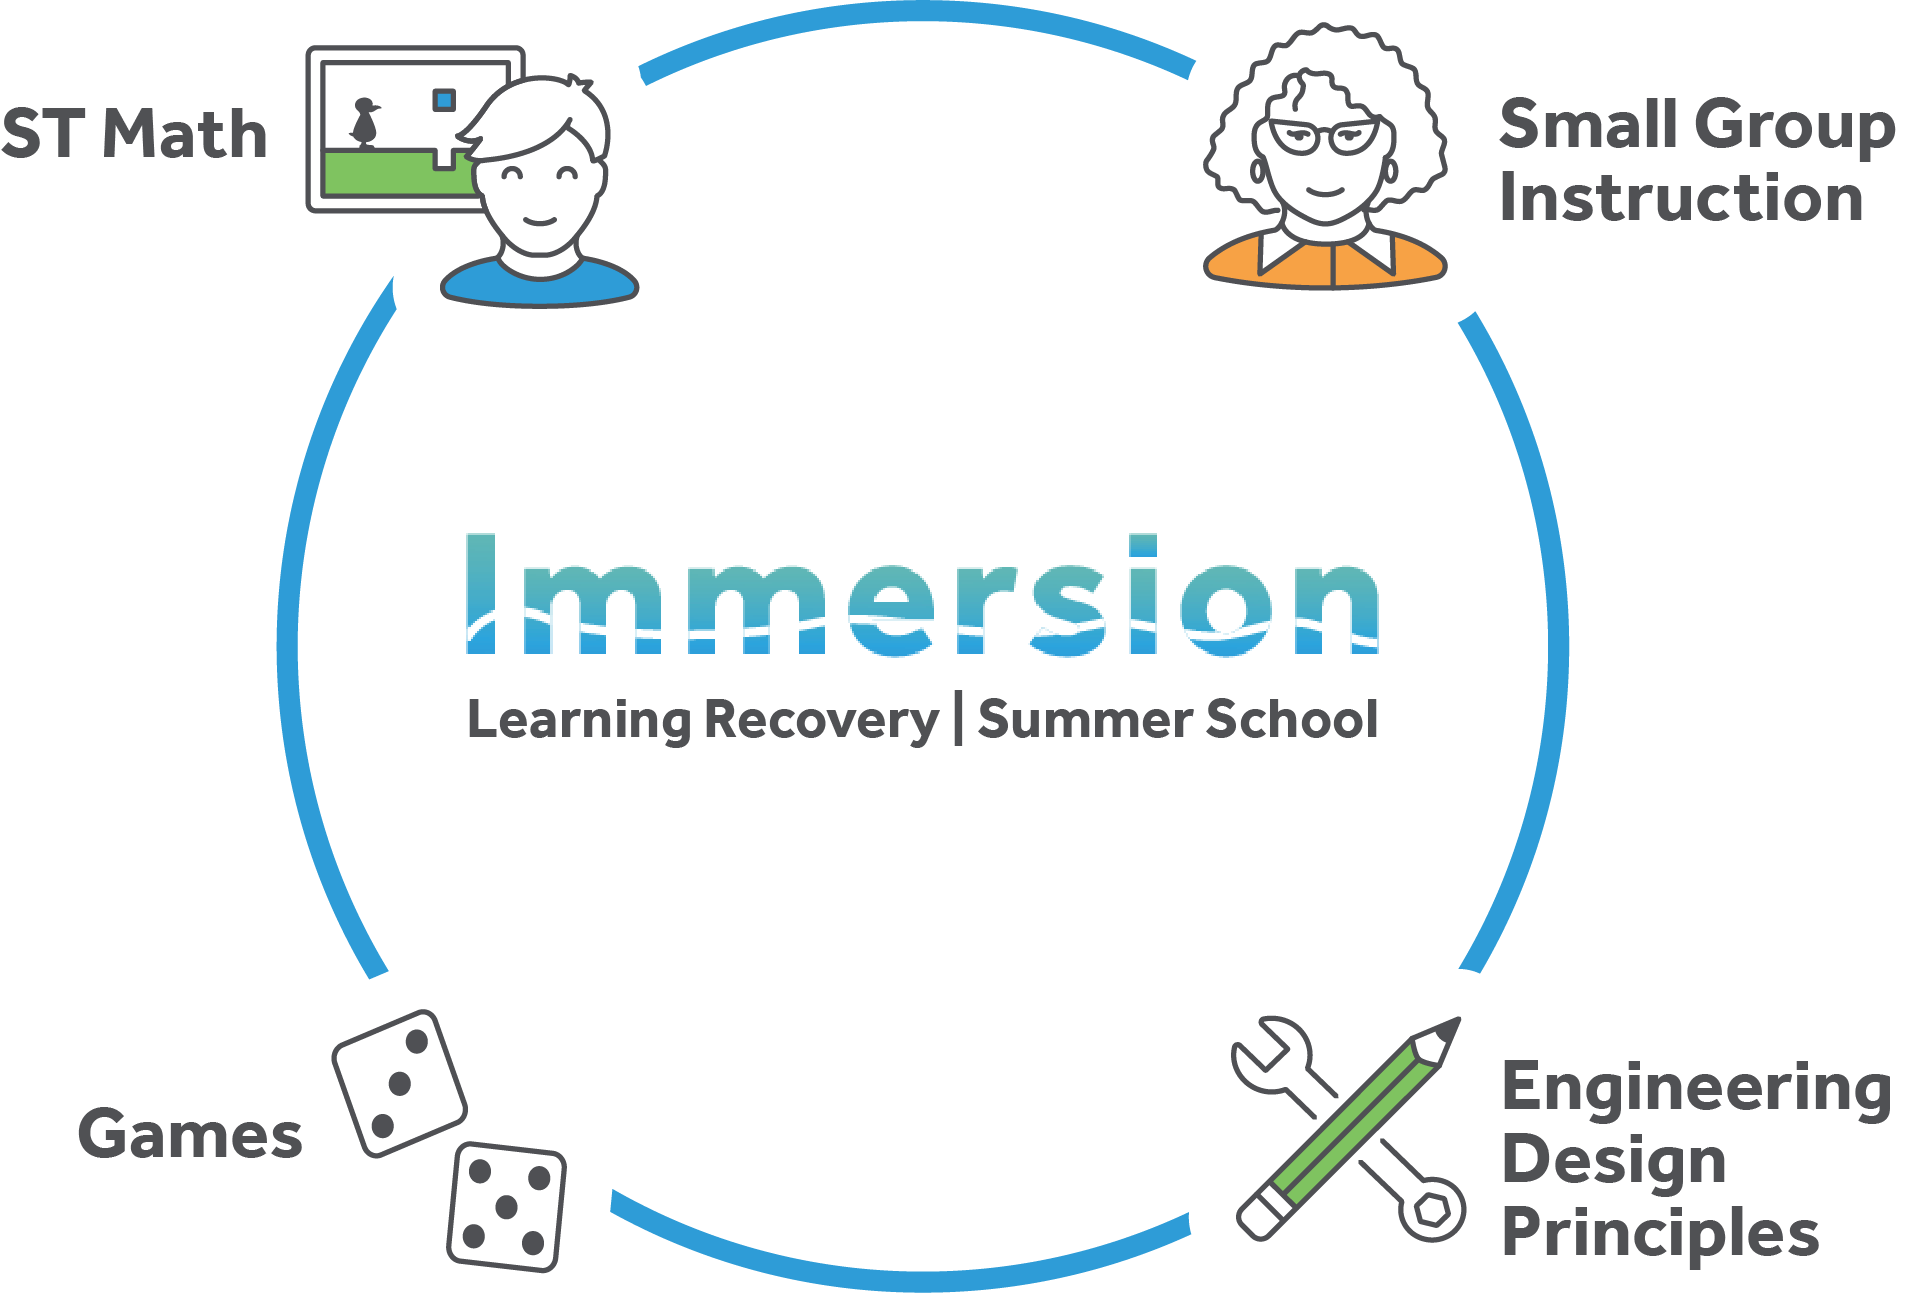 STMath-icons_Immersion-116-116